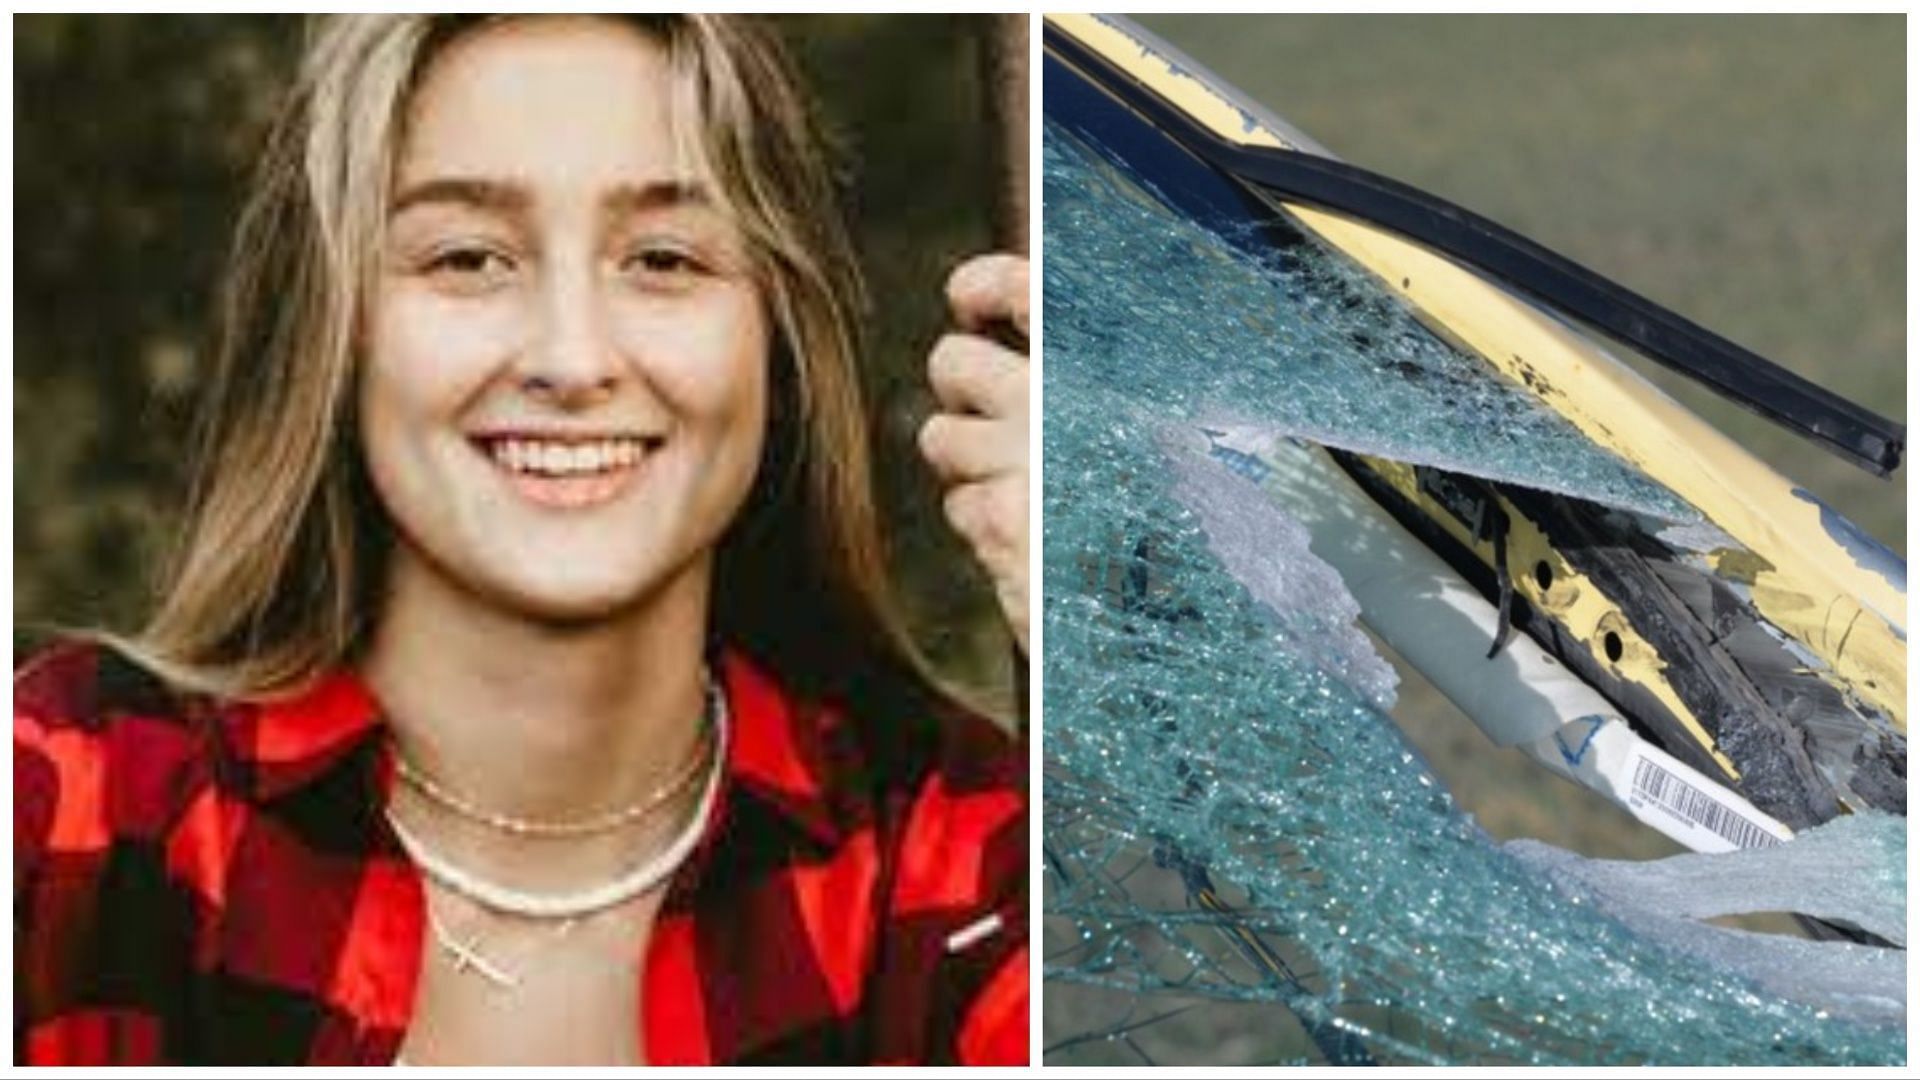 Bartell was killed by a rock thrown through the windshield of her car (images via Alexa Bartlett/Family/Facebook)